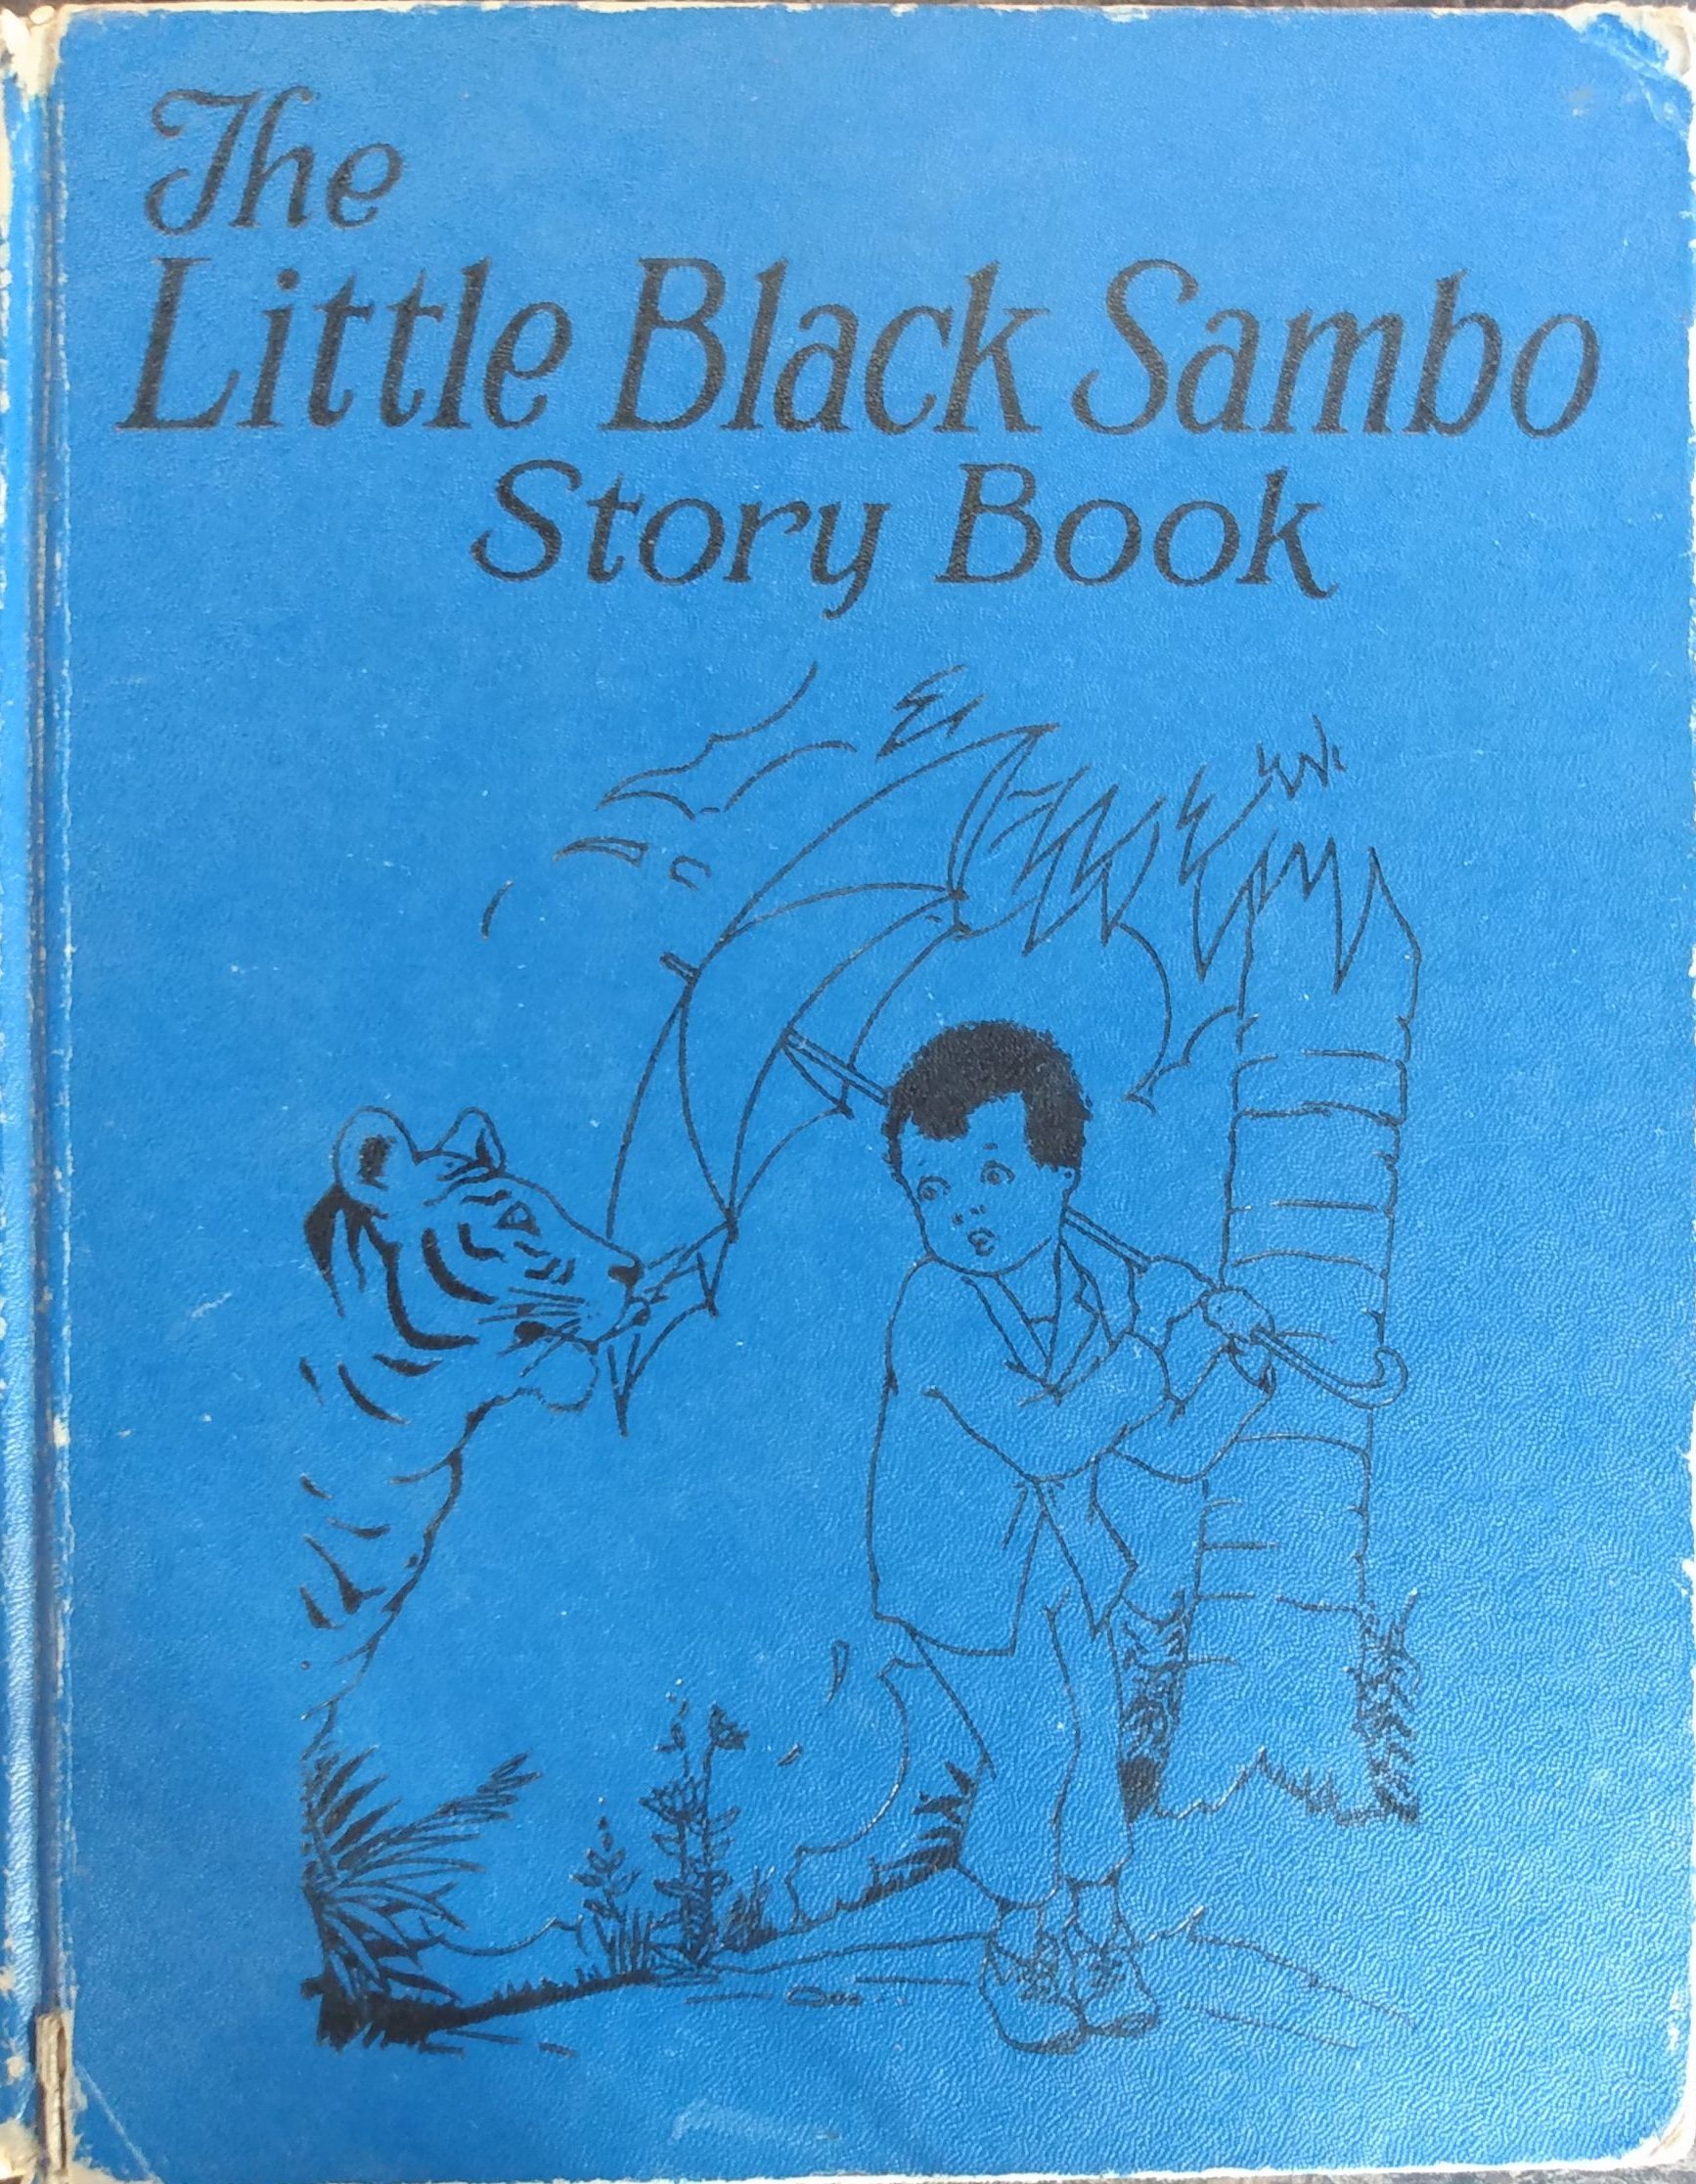 Cover of the Little Black Sambo Story Book